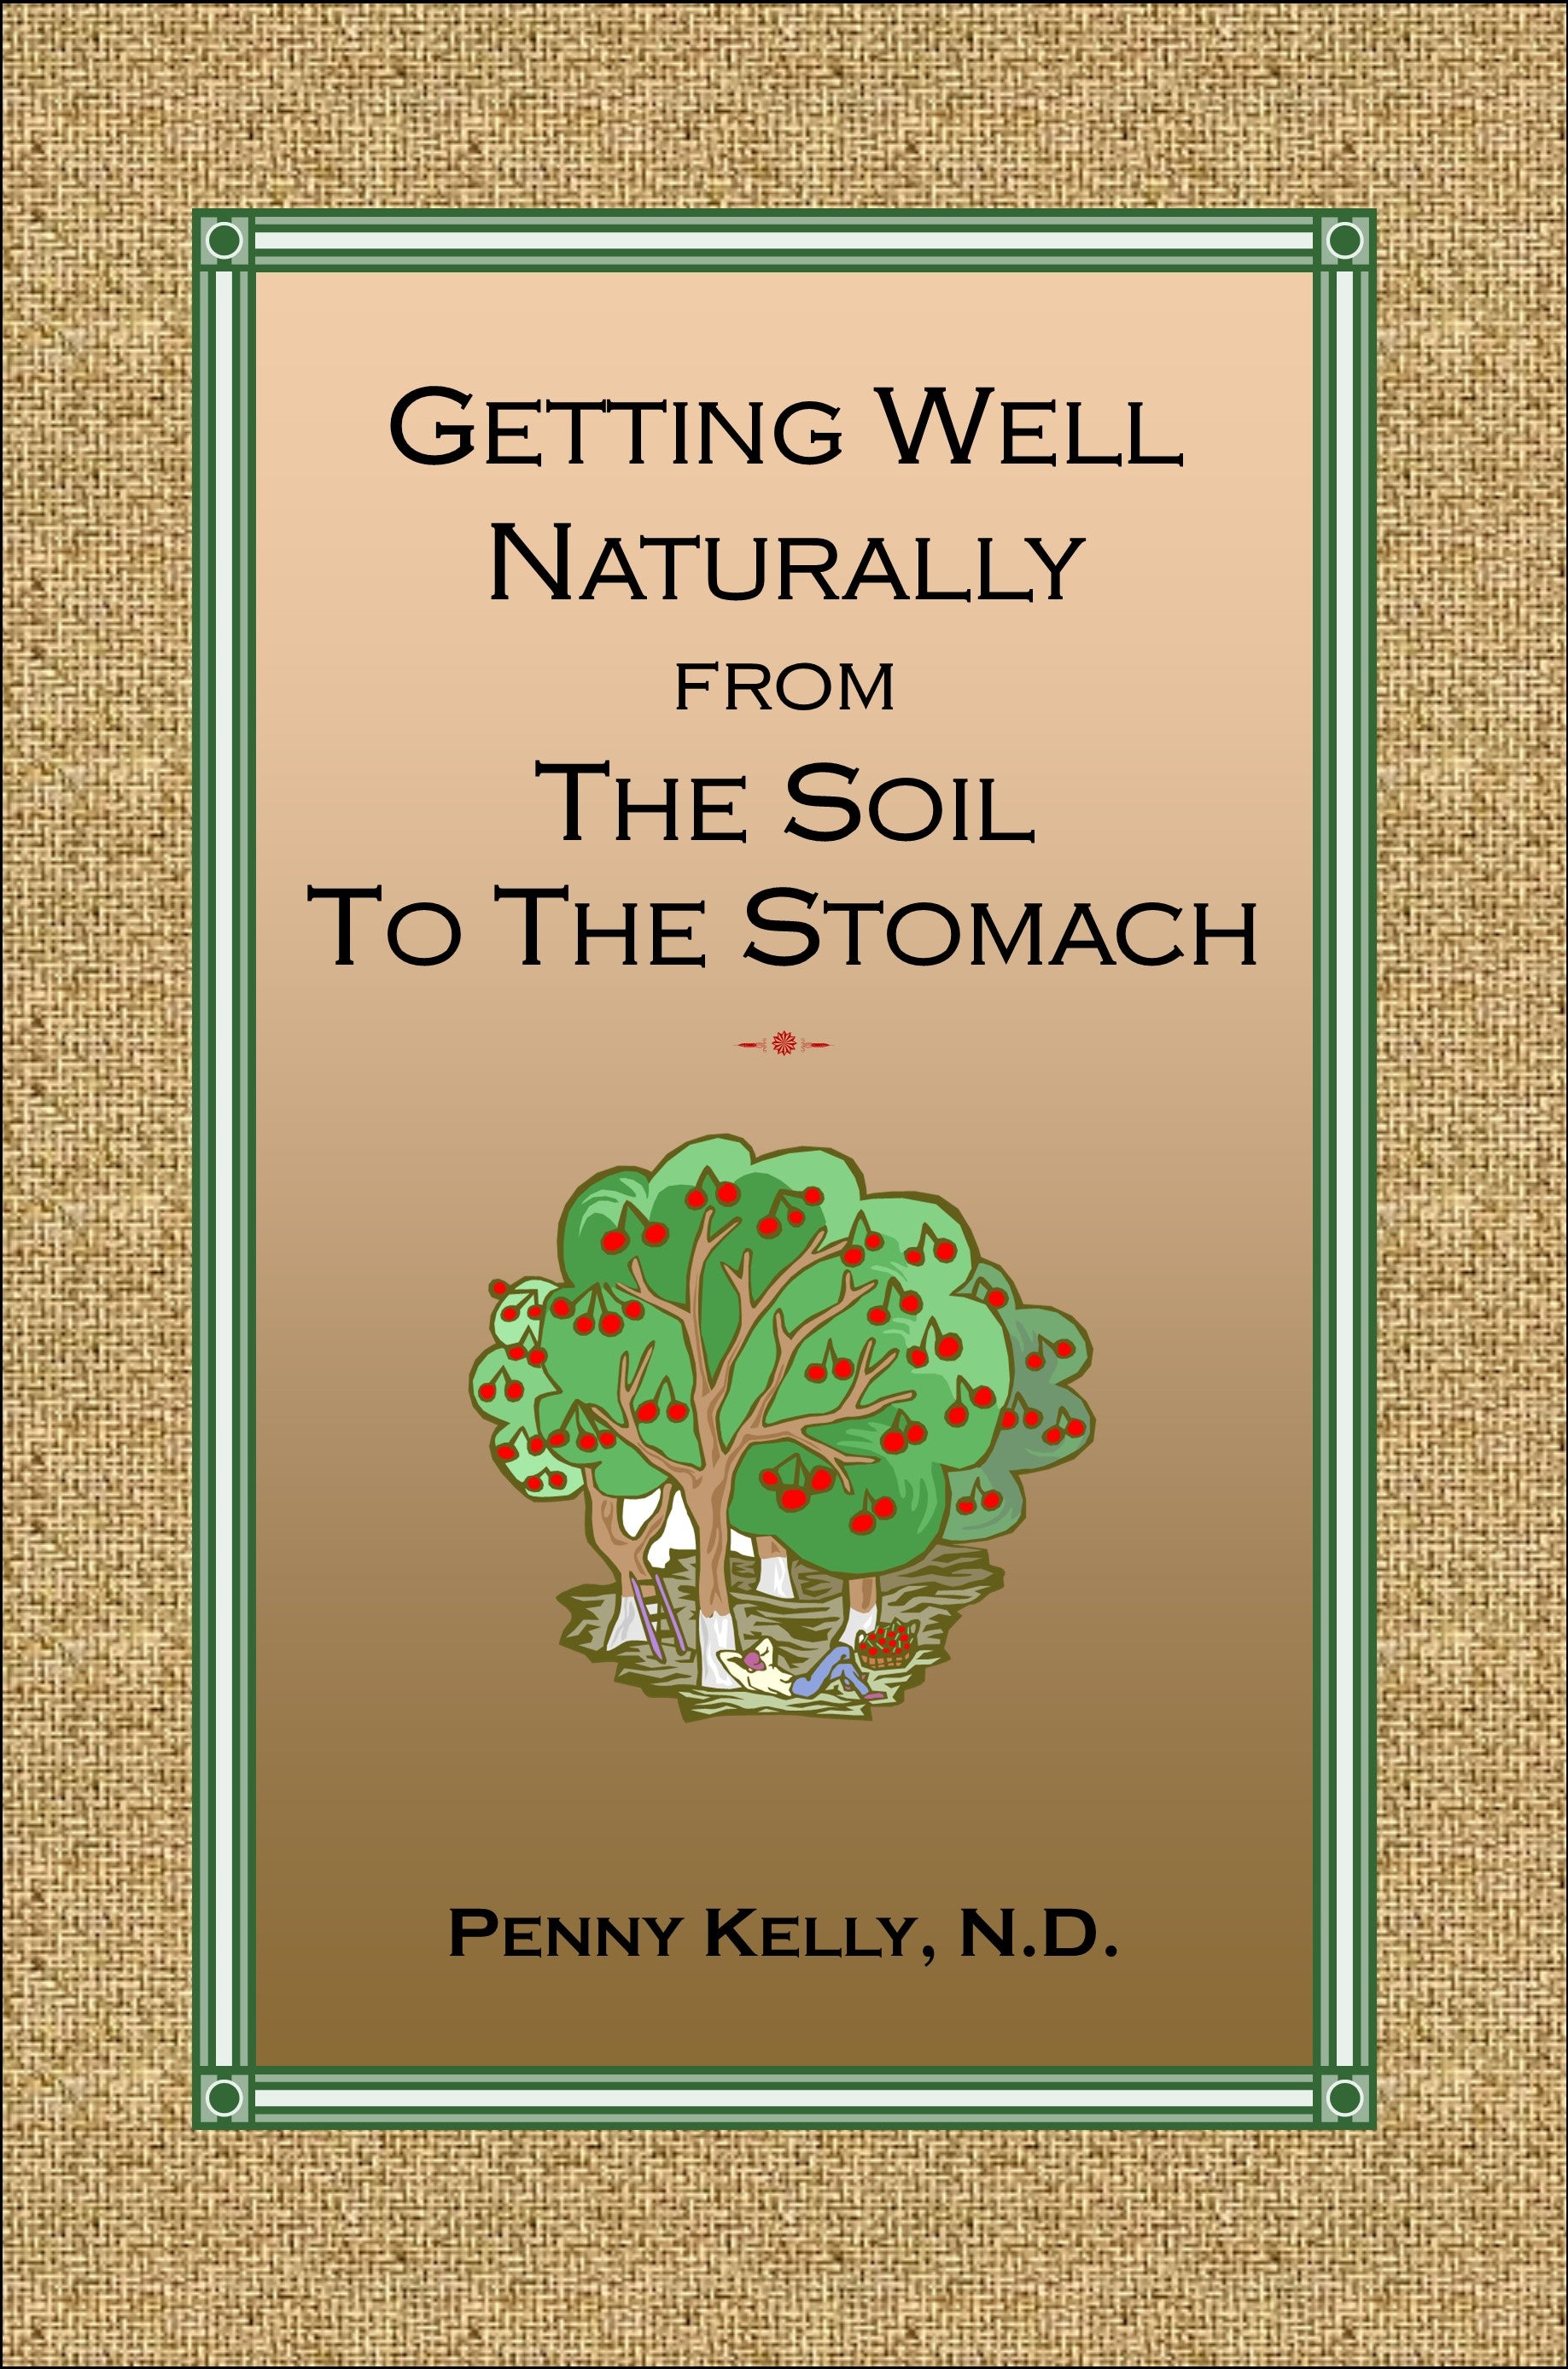 NEW VERSION: Getting Well Naturally - From The Soil to The Stomach (EBOOK - PDF)